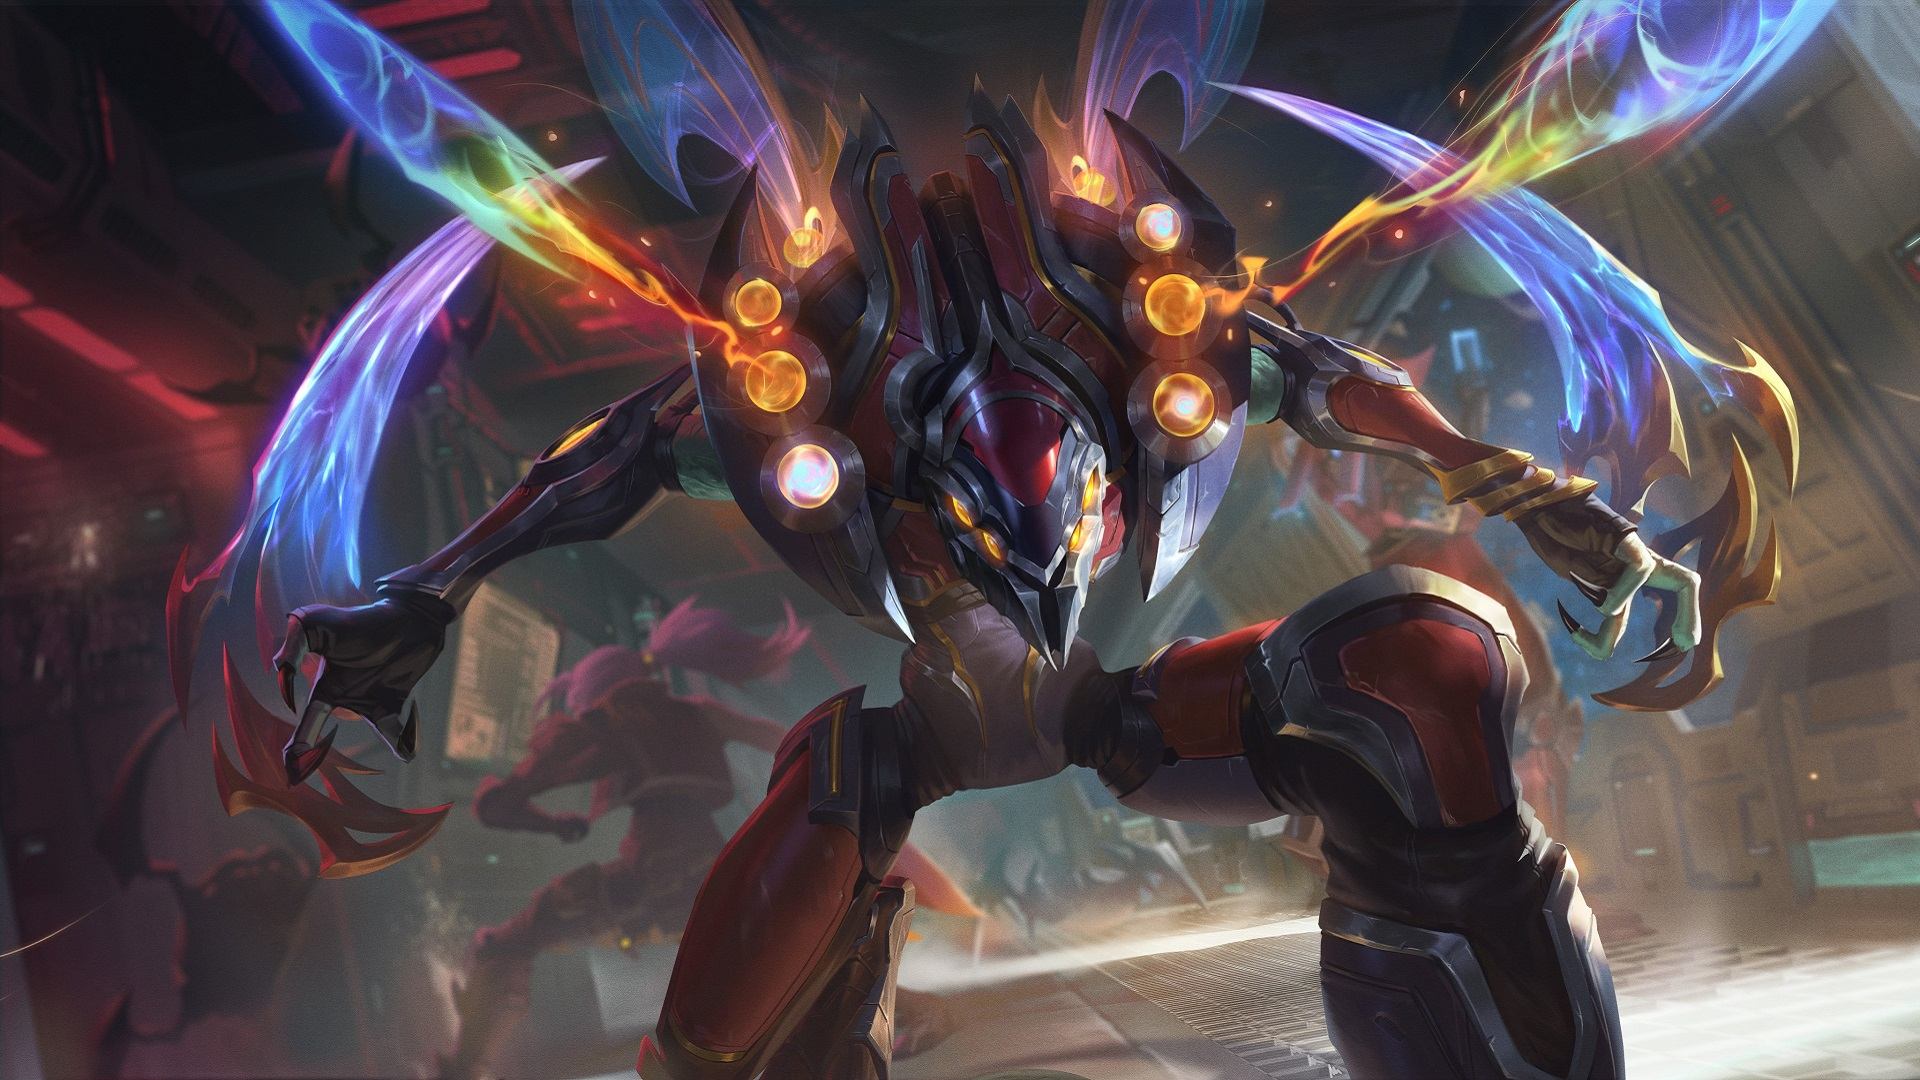 Wallpapers: Odyssey Kha'Zix and Twisted Fate skins splash art: League of Legends (Digital art by Riot Games)